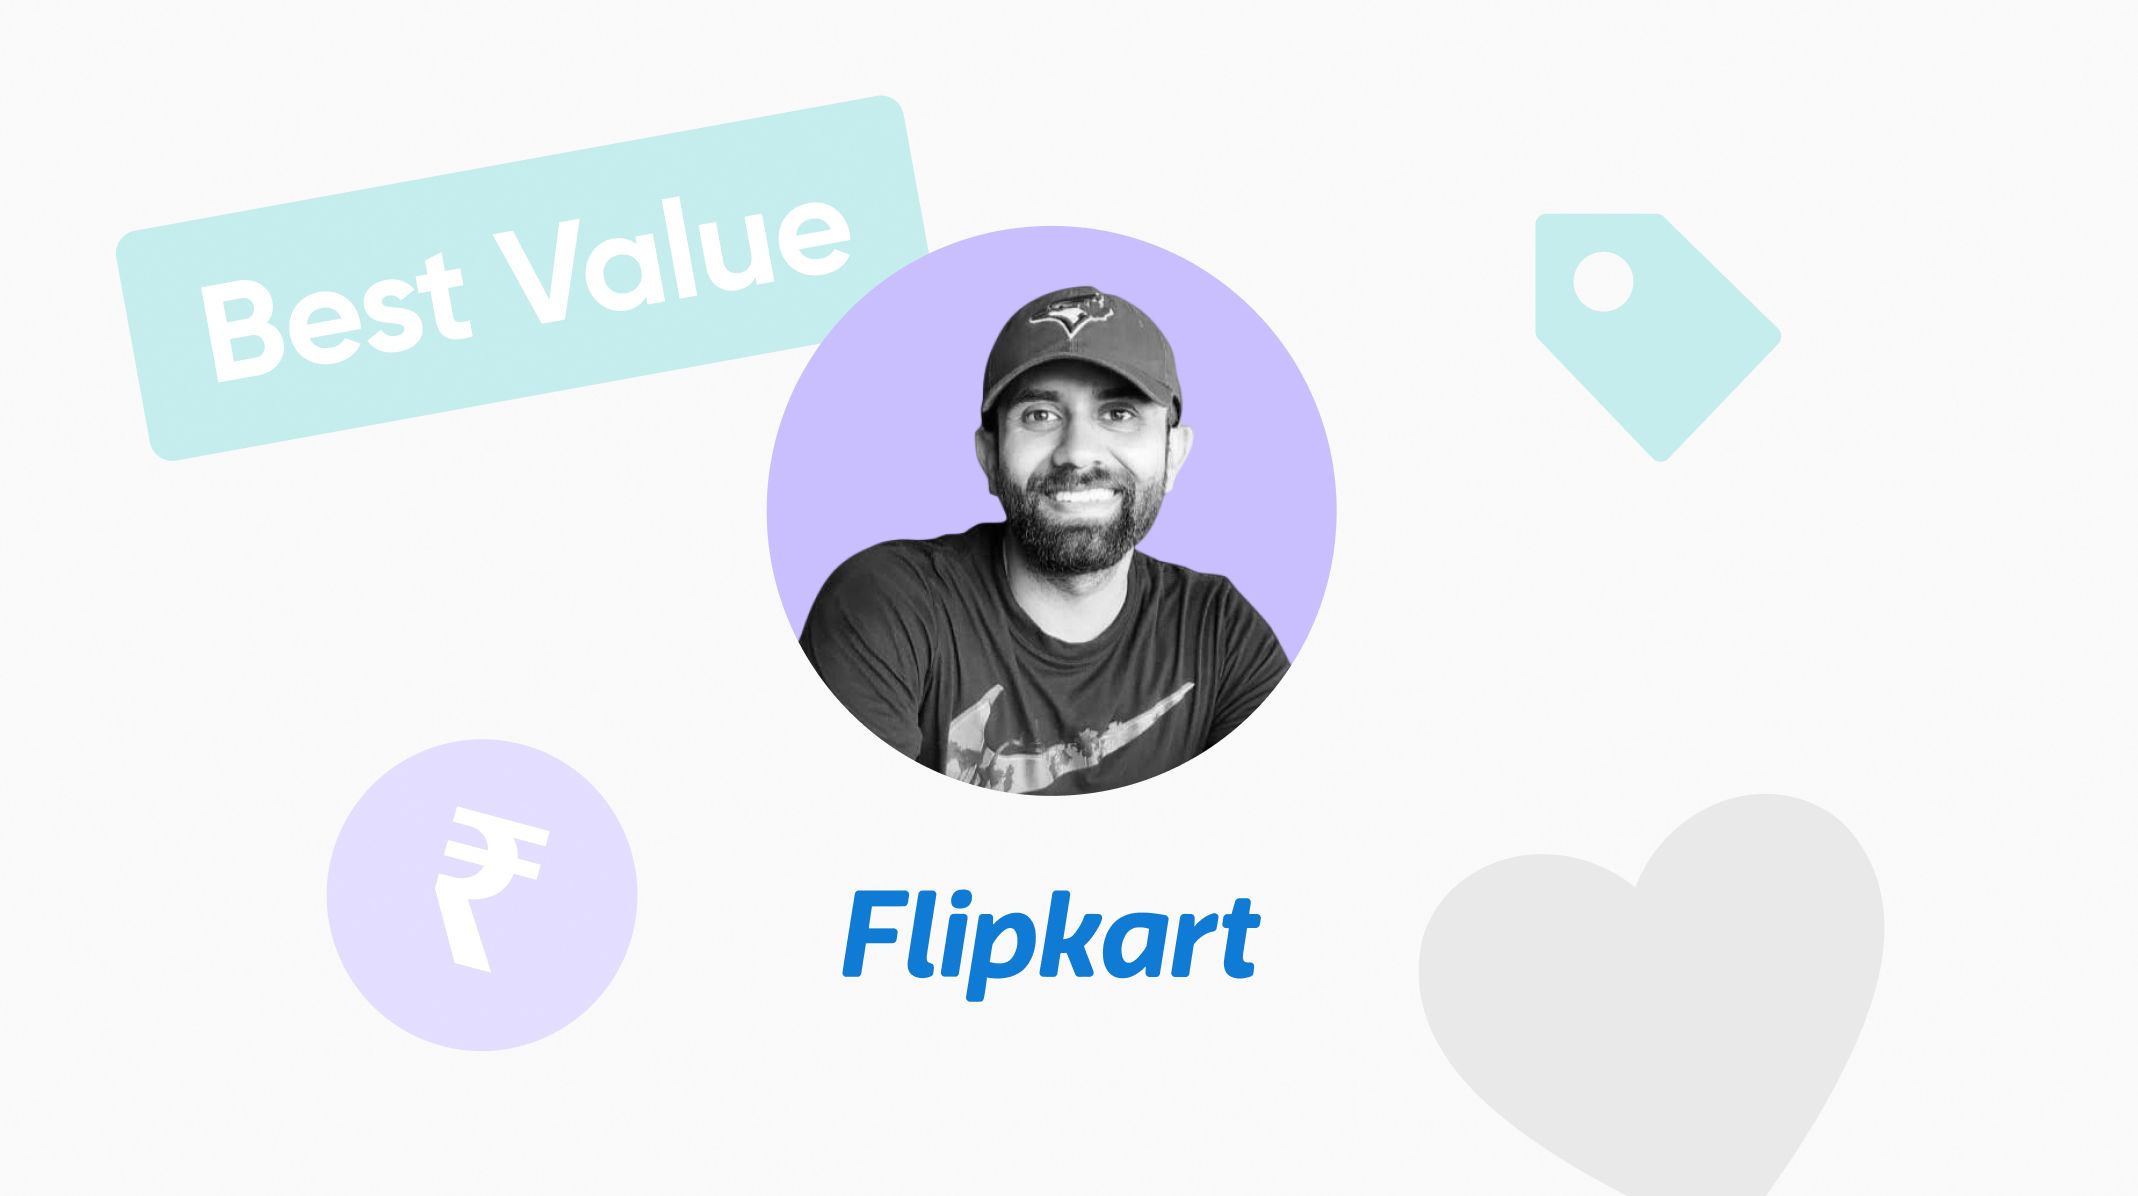 webinar about e-commerce prototyping with flipkart